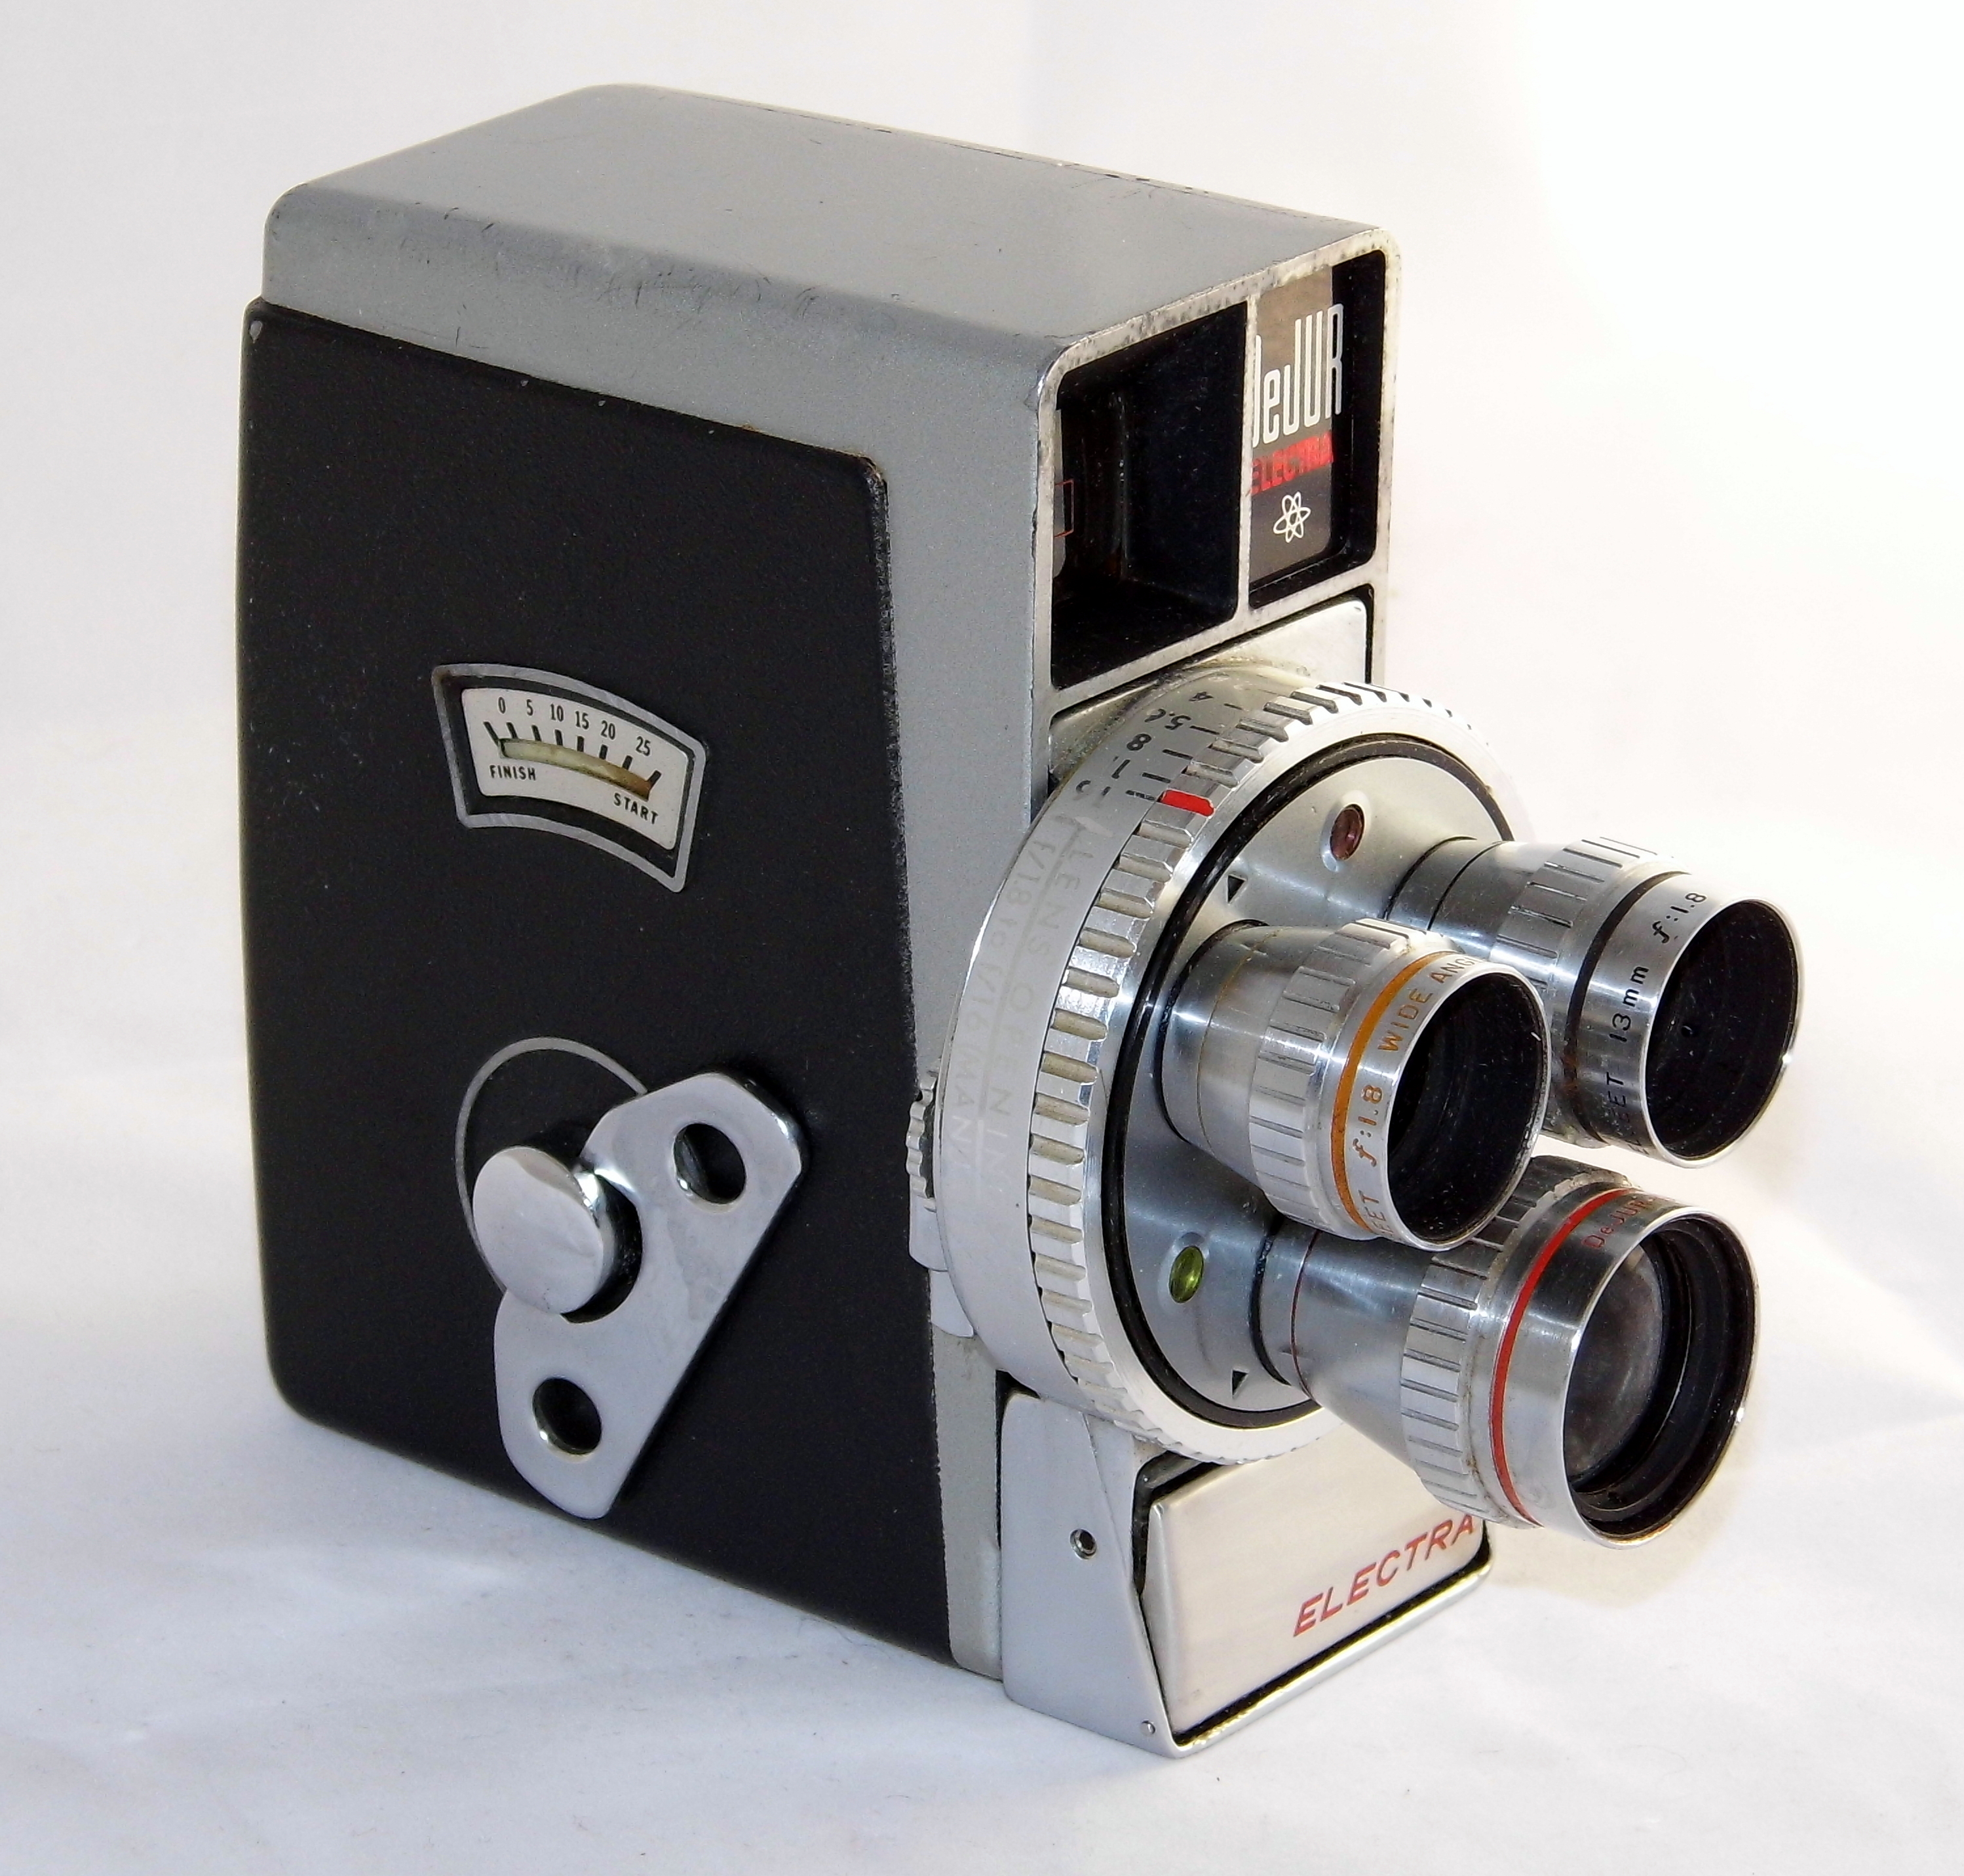 Vintage DeJUR Electra 8mm Movie Camera, Fully Automatic With Three Lens Turret System For Normal, Wide Angle & Telephoto Shots, Electric Eye With Protective Lid, Circa 1958 (18281760146)